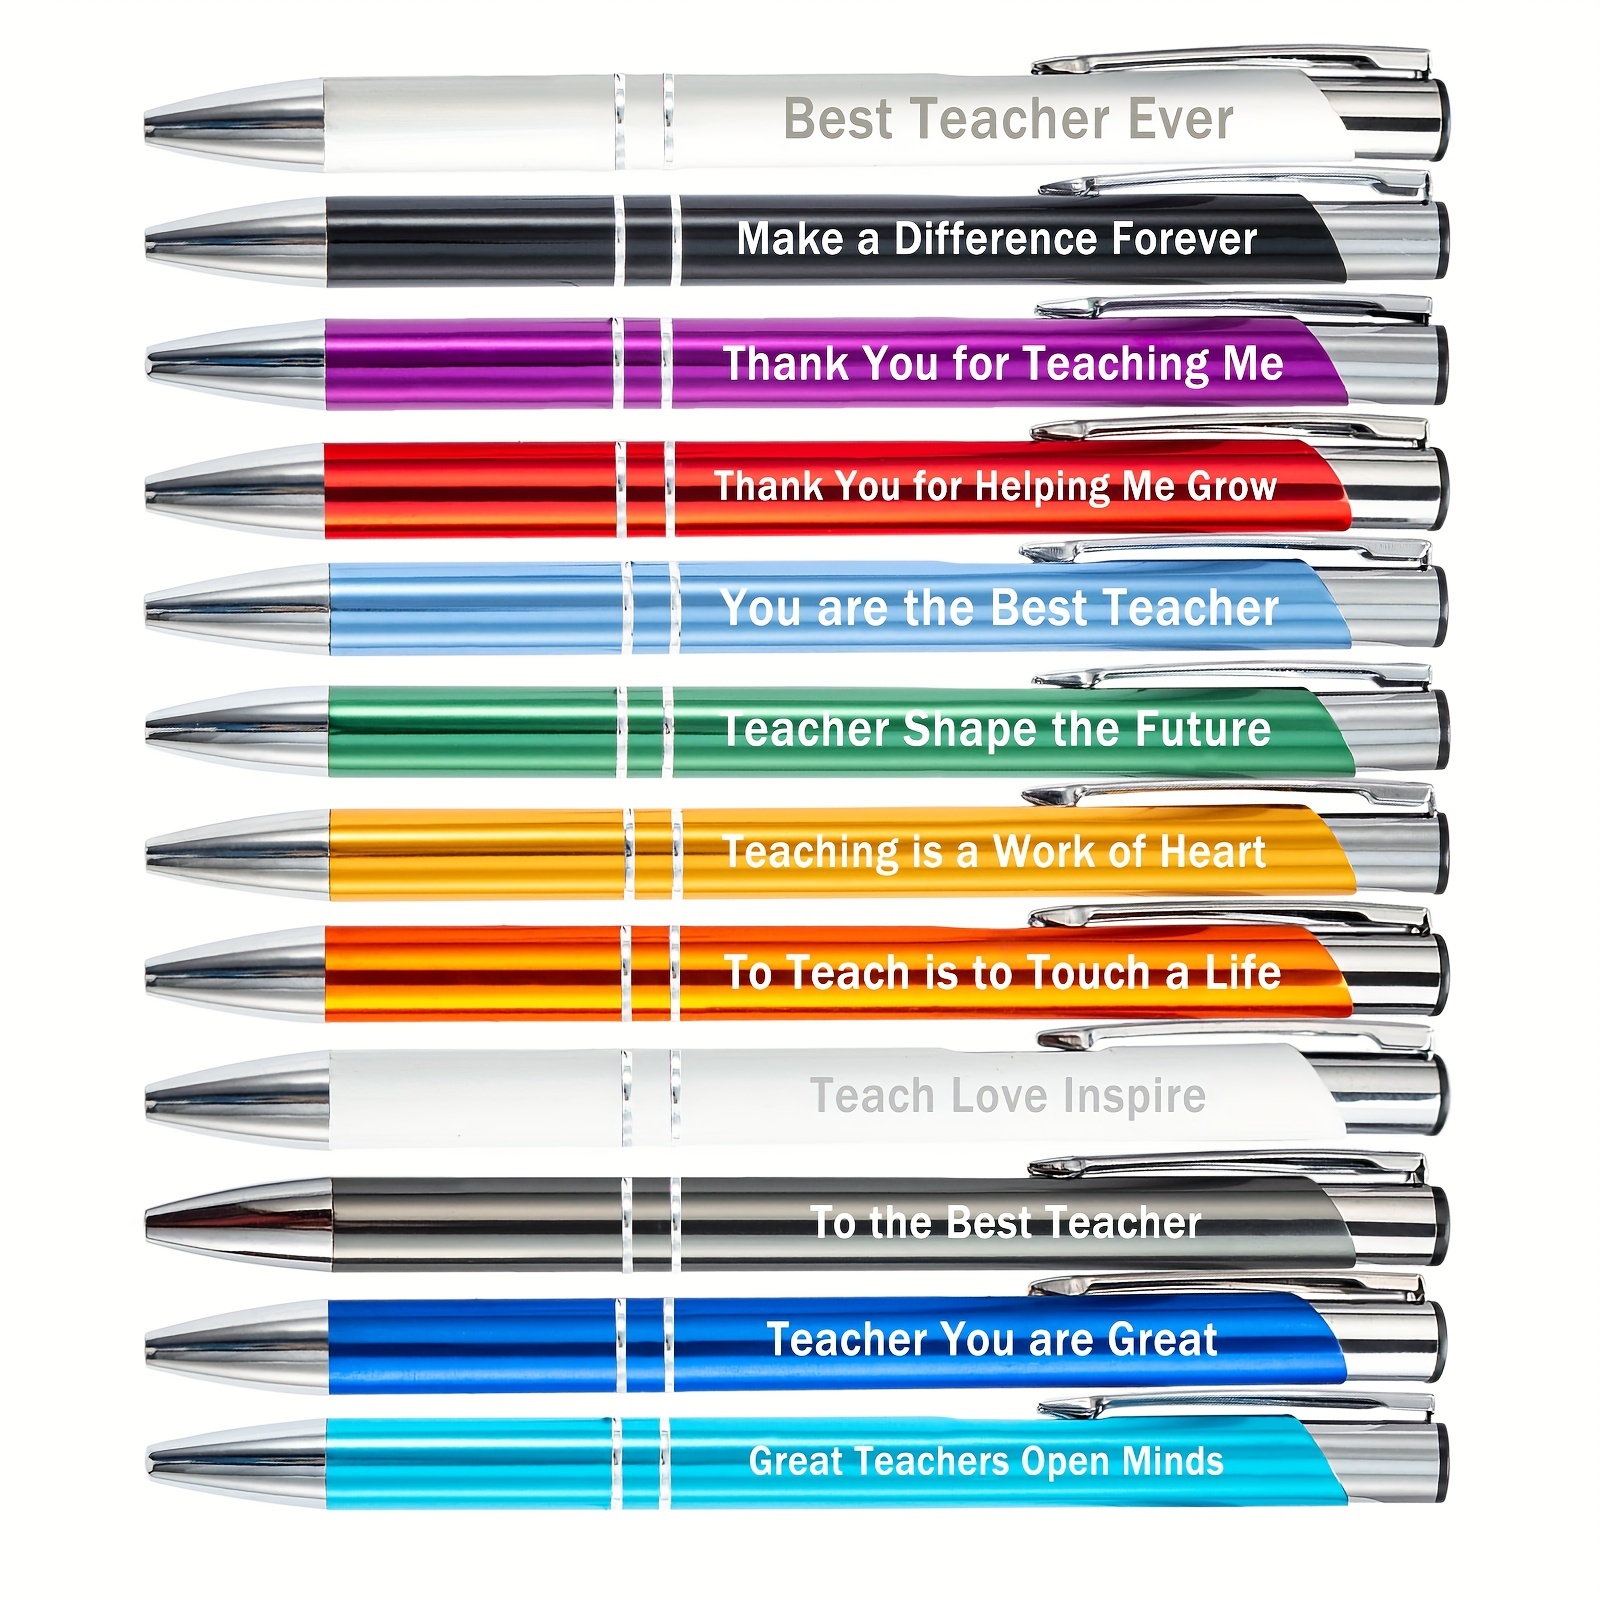 The Best Pens and Inks for Teachers